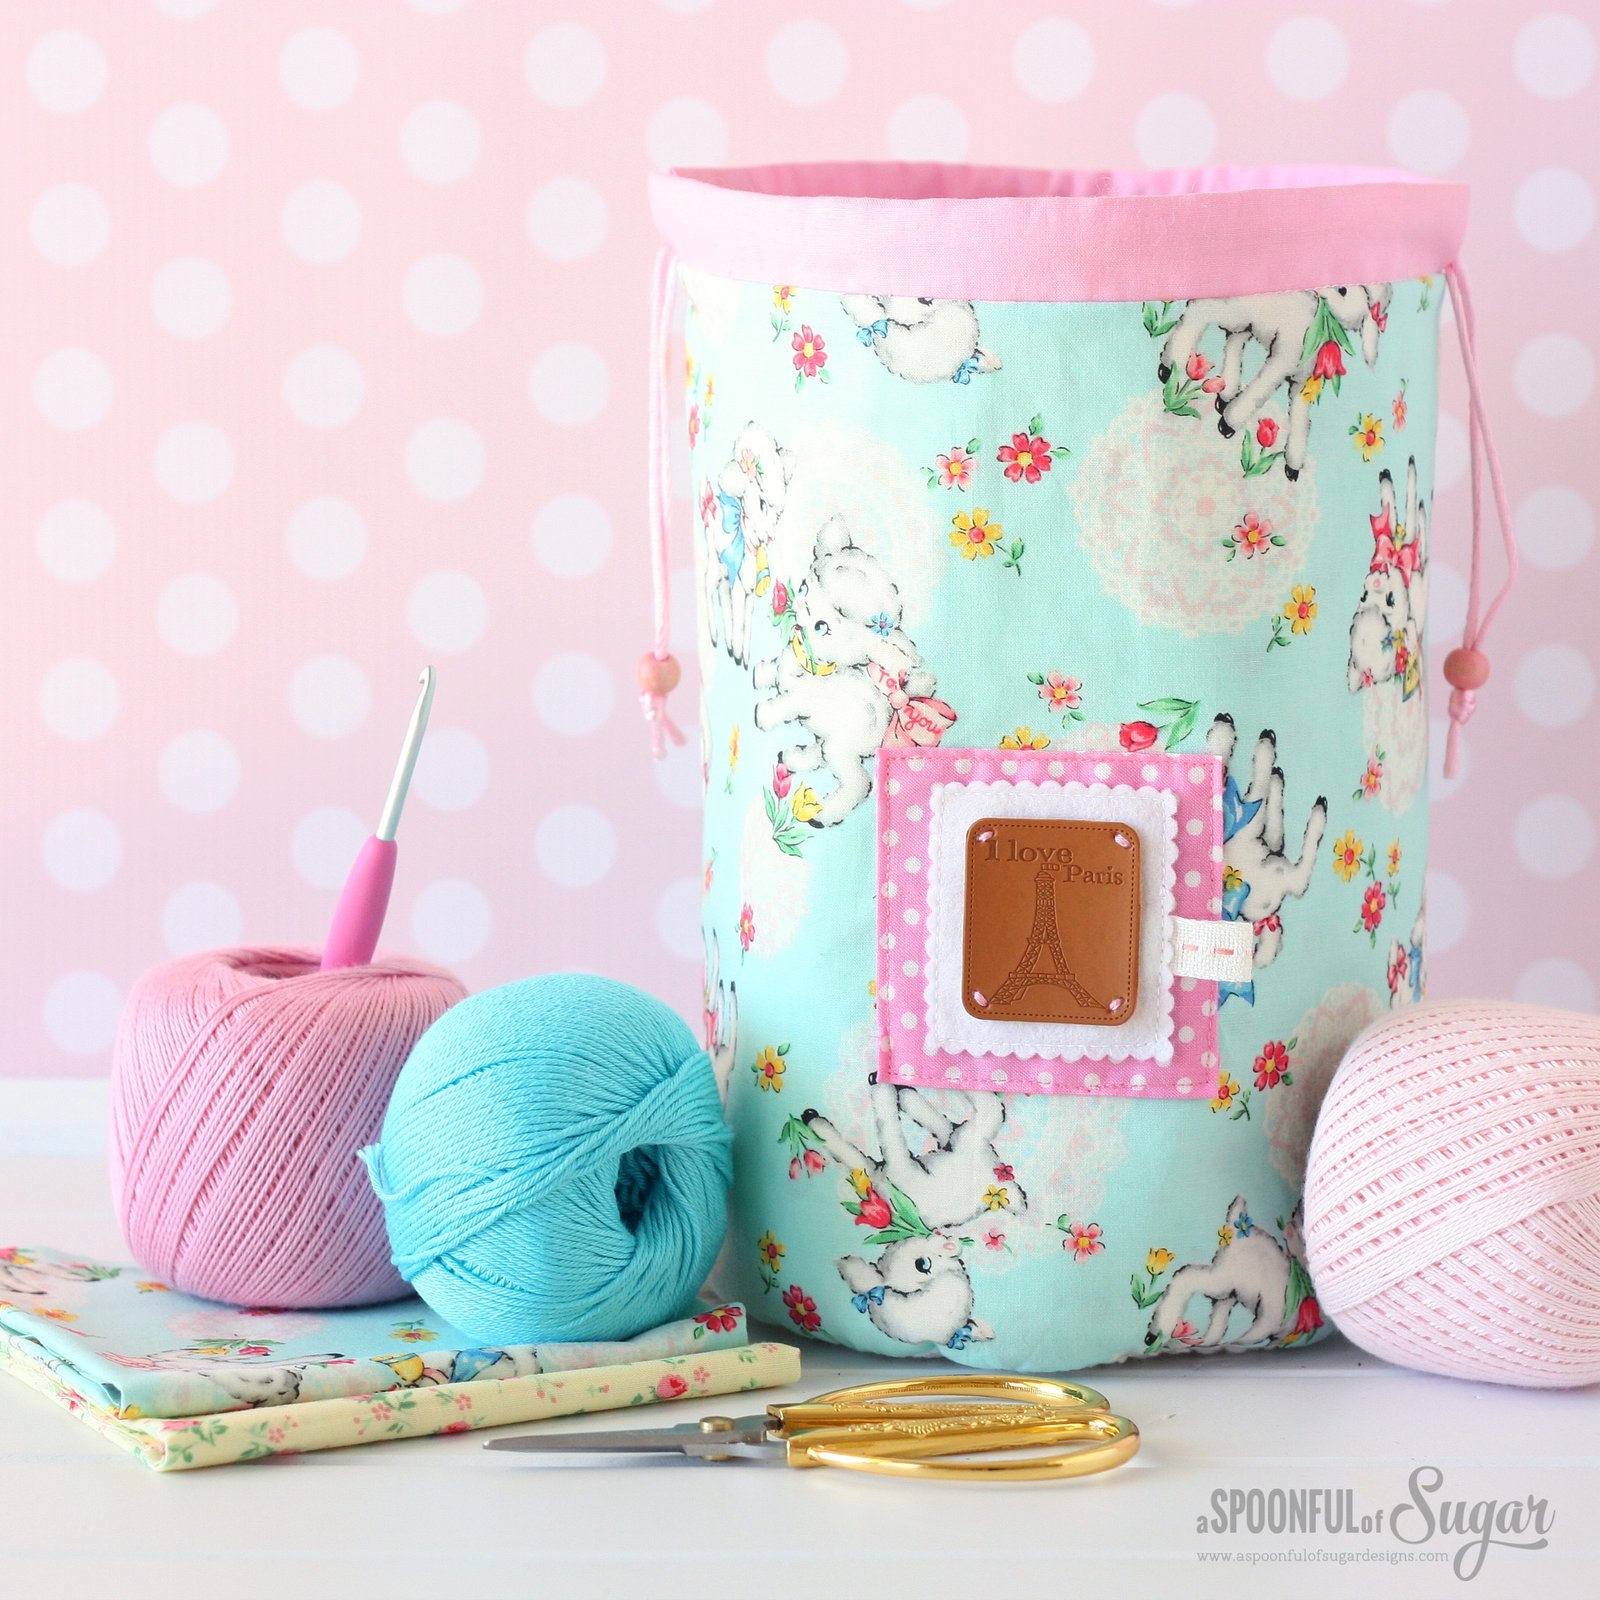 Zakka Dilly Bag from A Spoonful of Sugar: Sew 20 Simple Projects to Sweeten your Surroundings Zakka Style by Lisa Cox